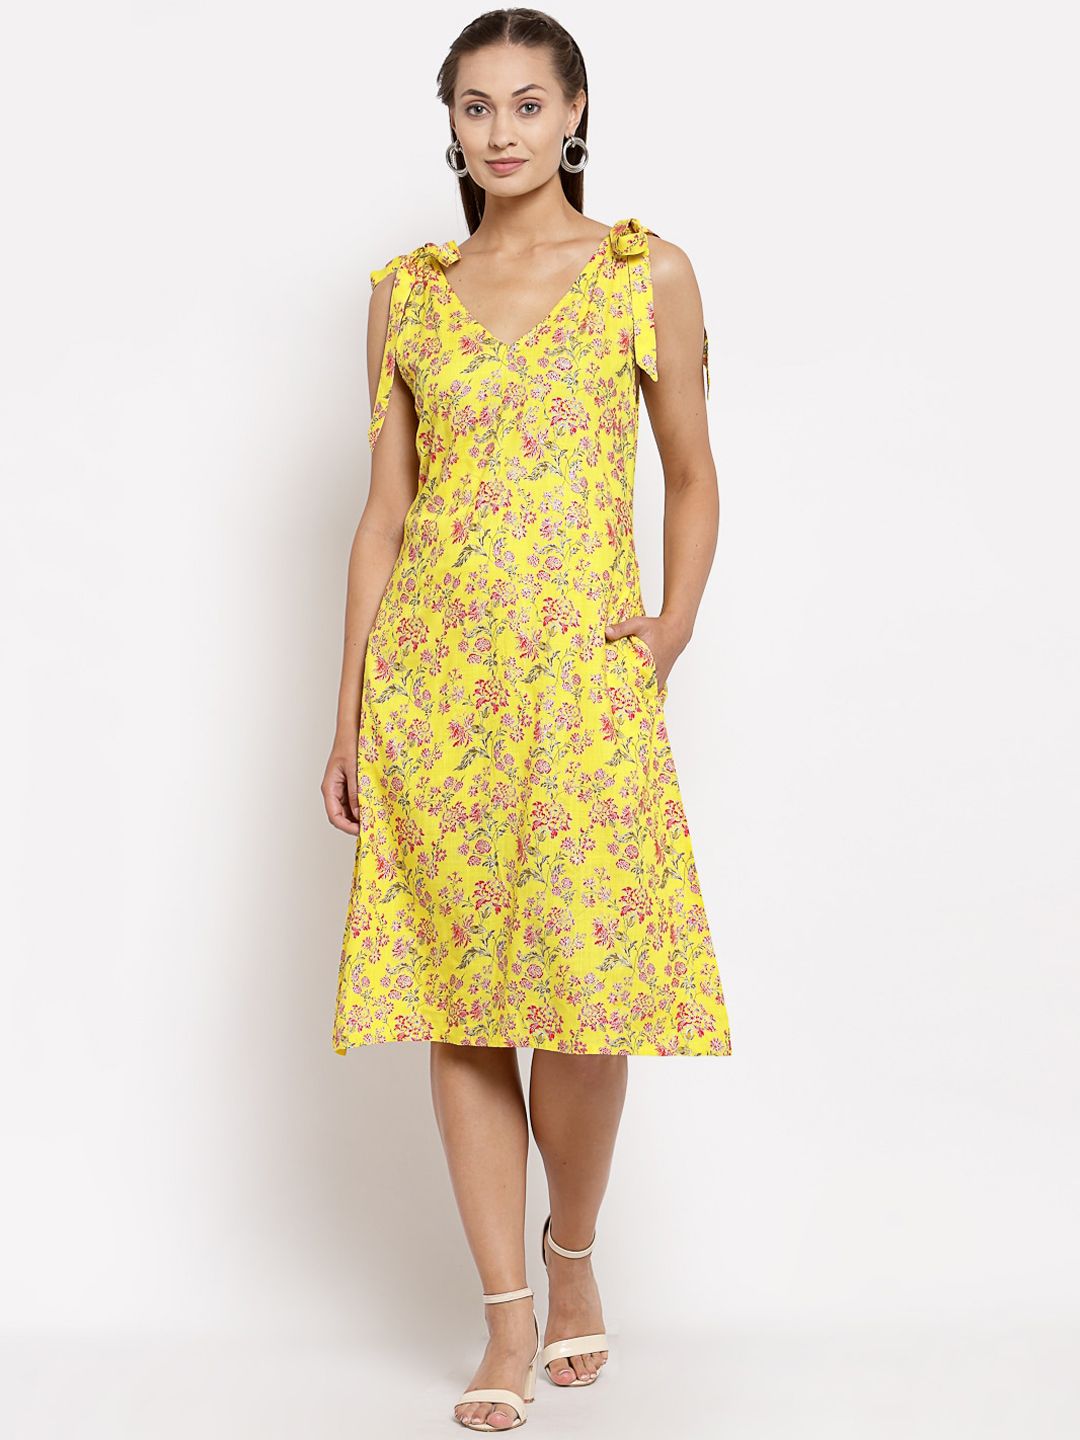 Myshka Yellow Floral Printed A-Line Dress Price in India